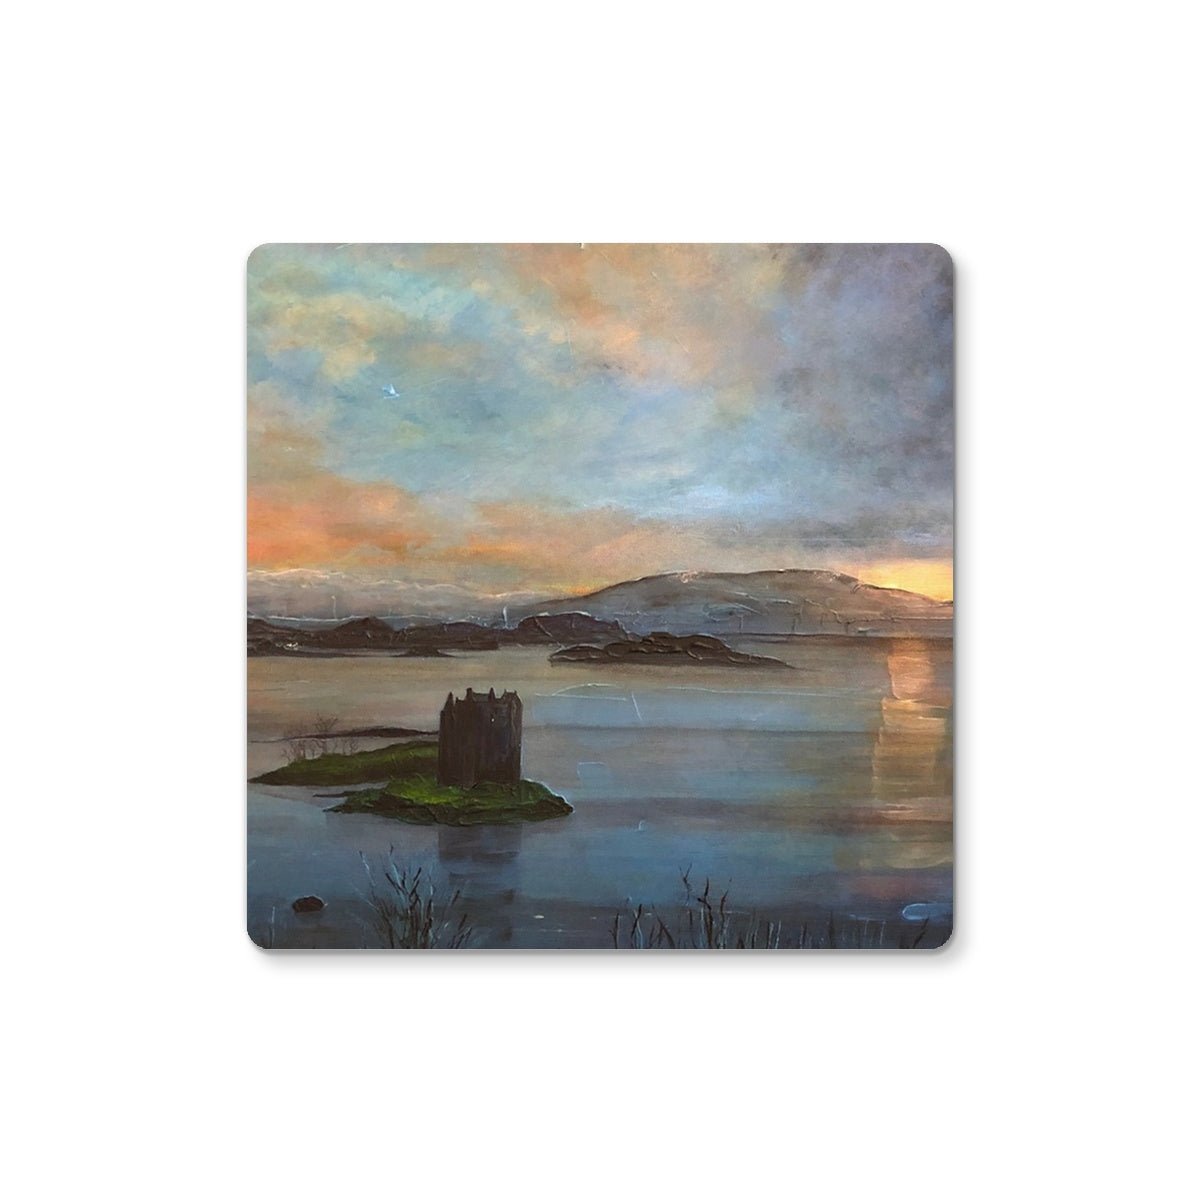 Castle Stalker Twilight Art Gift Coaster-Coasters-Scottish Castles Art Gallery-4 Coasters-Paintings, Prints, Homeware, Art Gifts From Scotland By Scottish Artist Kevin Hunter